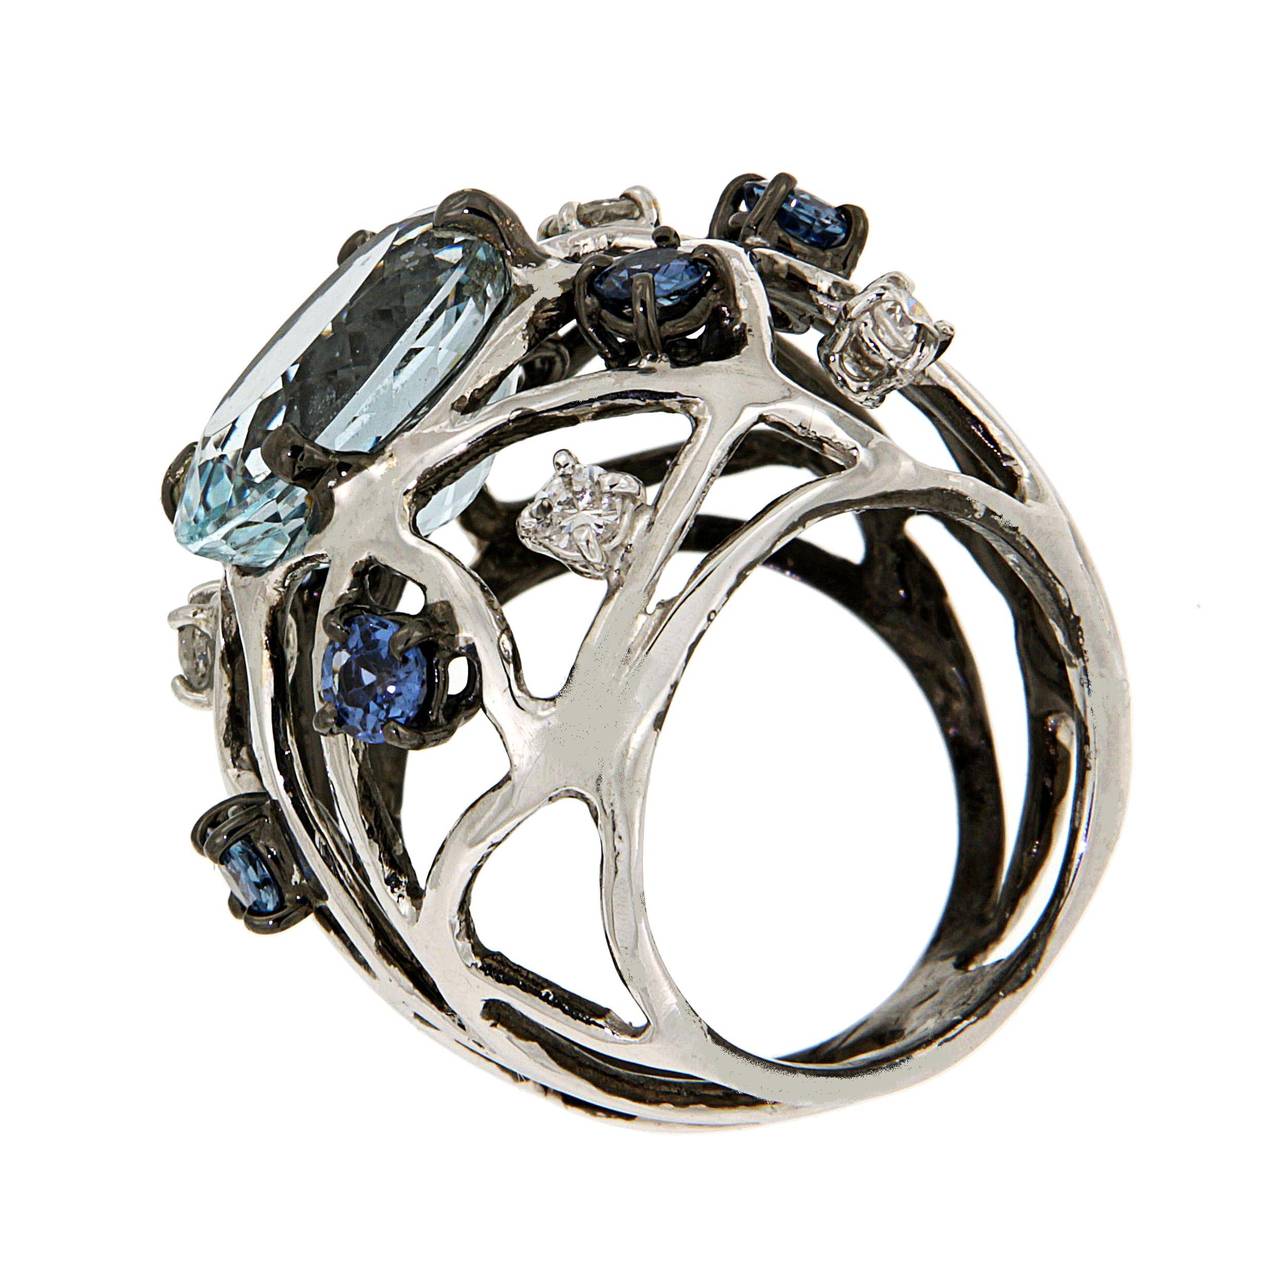 A surprising aquamarine is the main feature of this 18 karat white gold ring, sapphires and diamonds surround the precious stone. Modern ring, Air Collection, with aquamarine 5.70 ctw, brilliant cut diamonds 0.40 ctw and brilliant cut sapphires 1.40